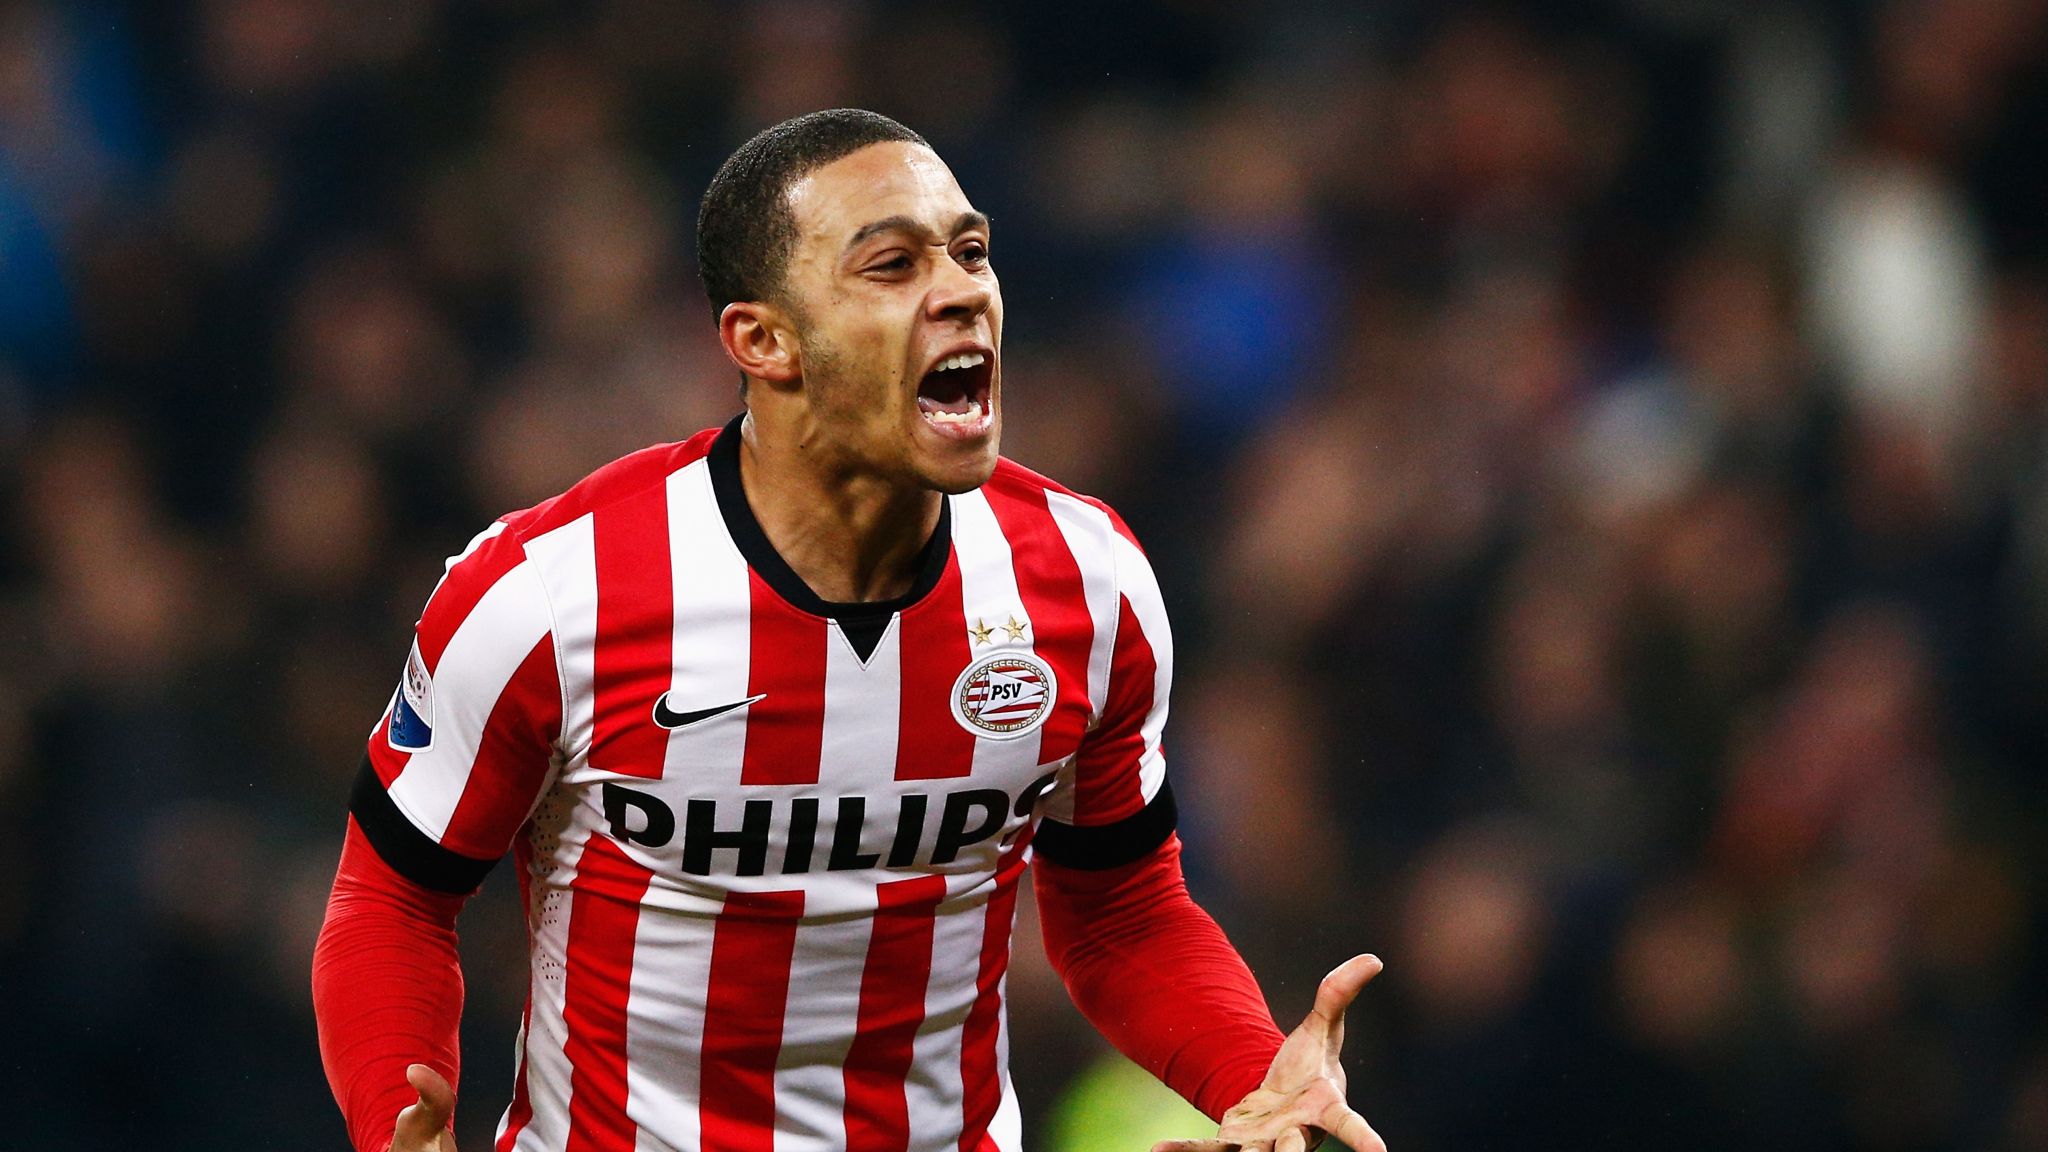 Memphis Depay Age, Wife, Family & Biography